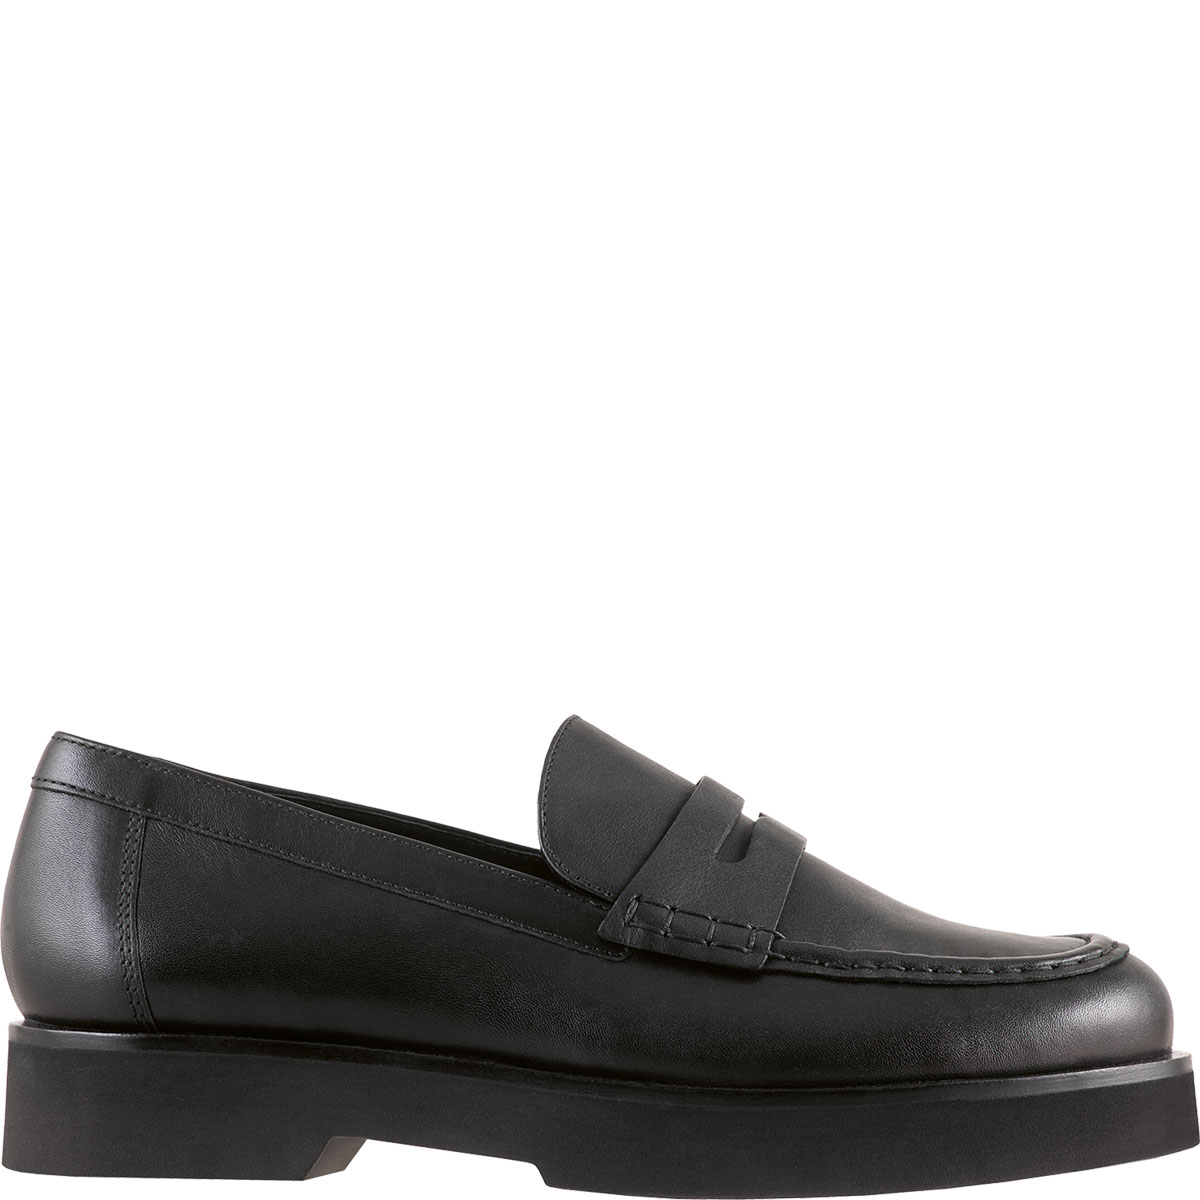 Stanley Loafers